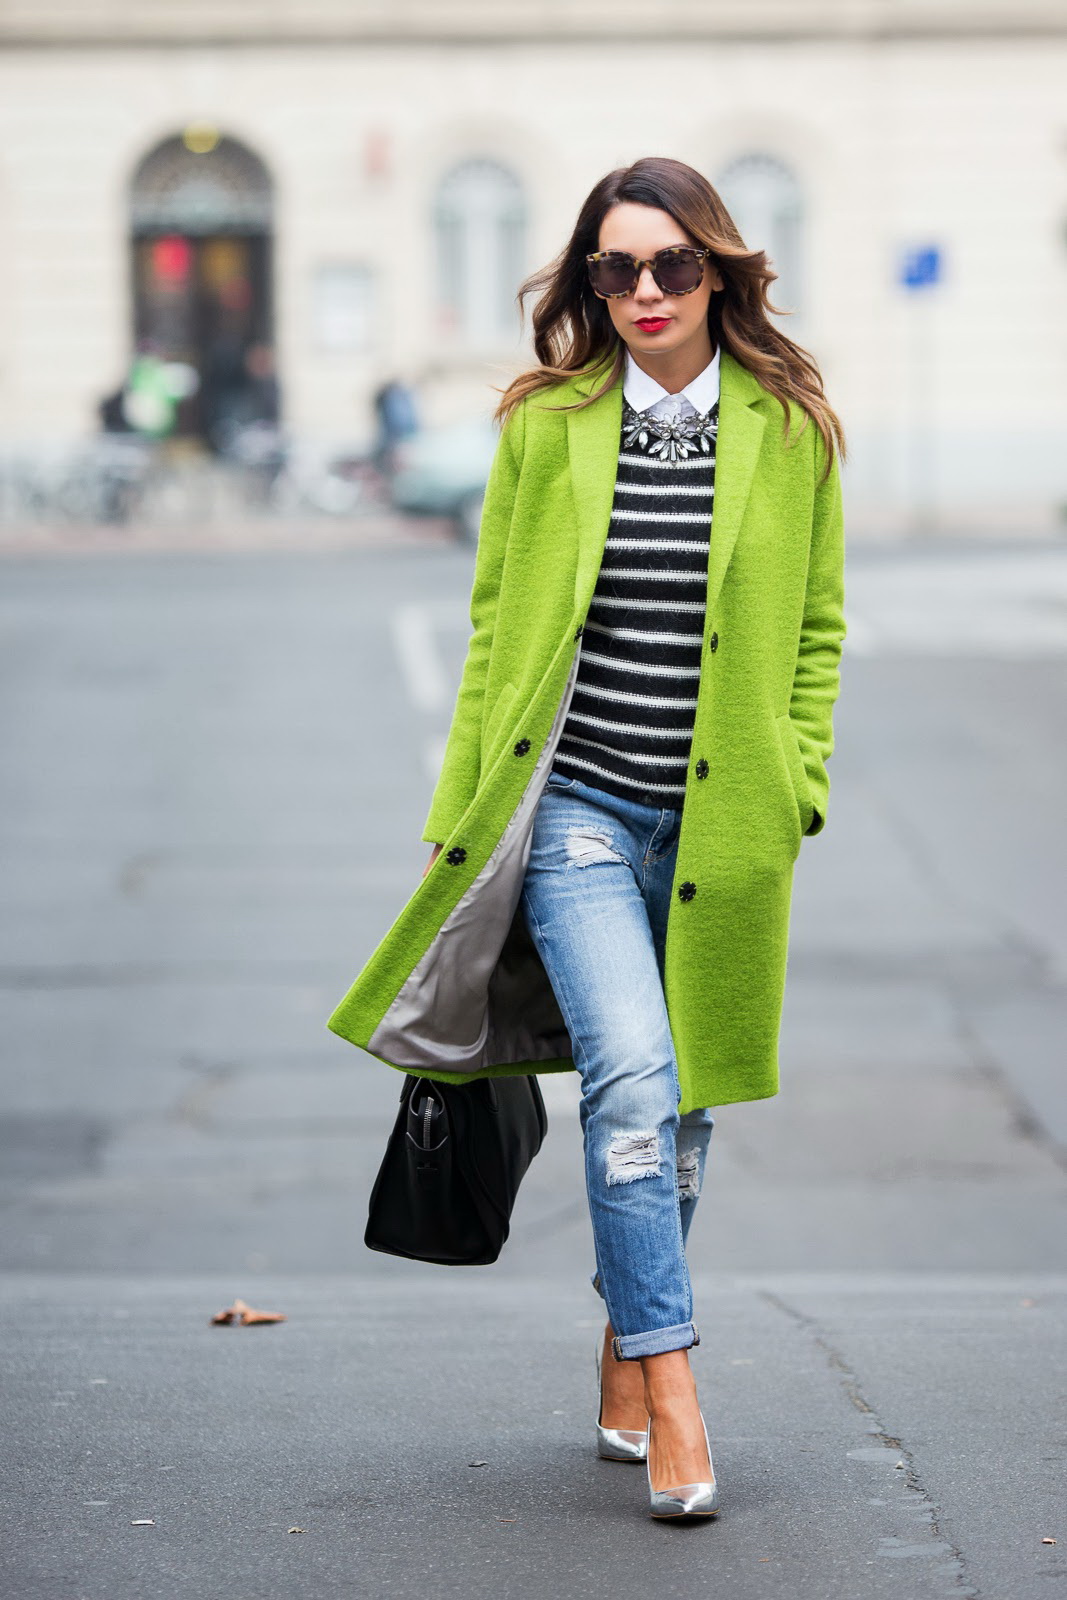 The Best Women's Fall Outfit Ideas